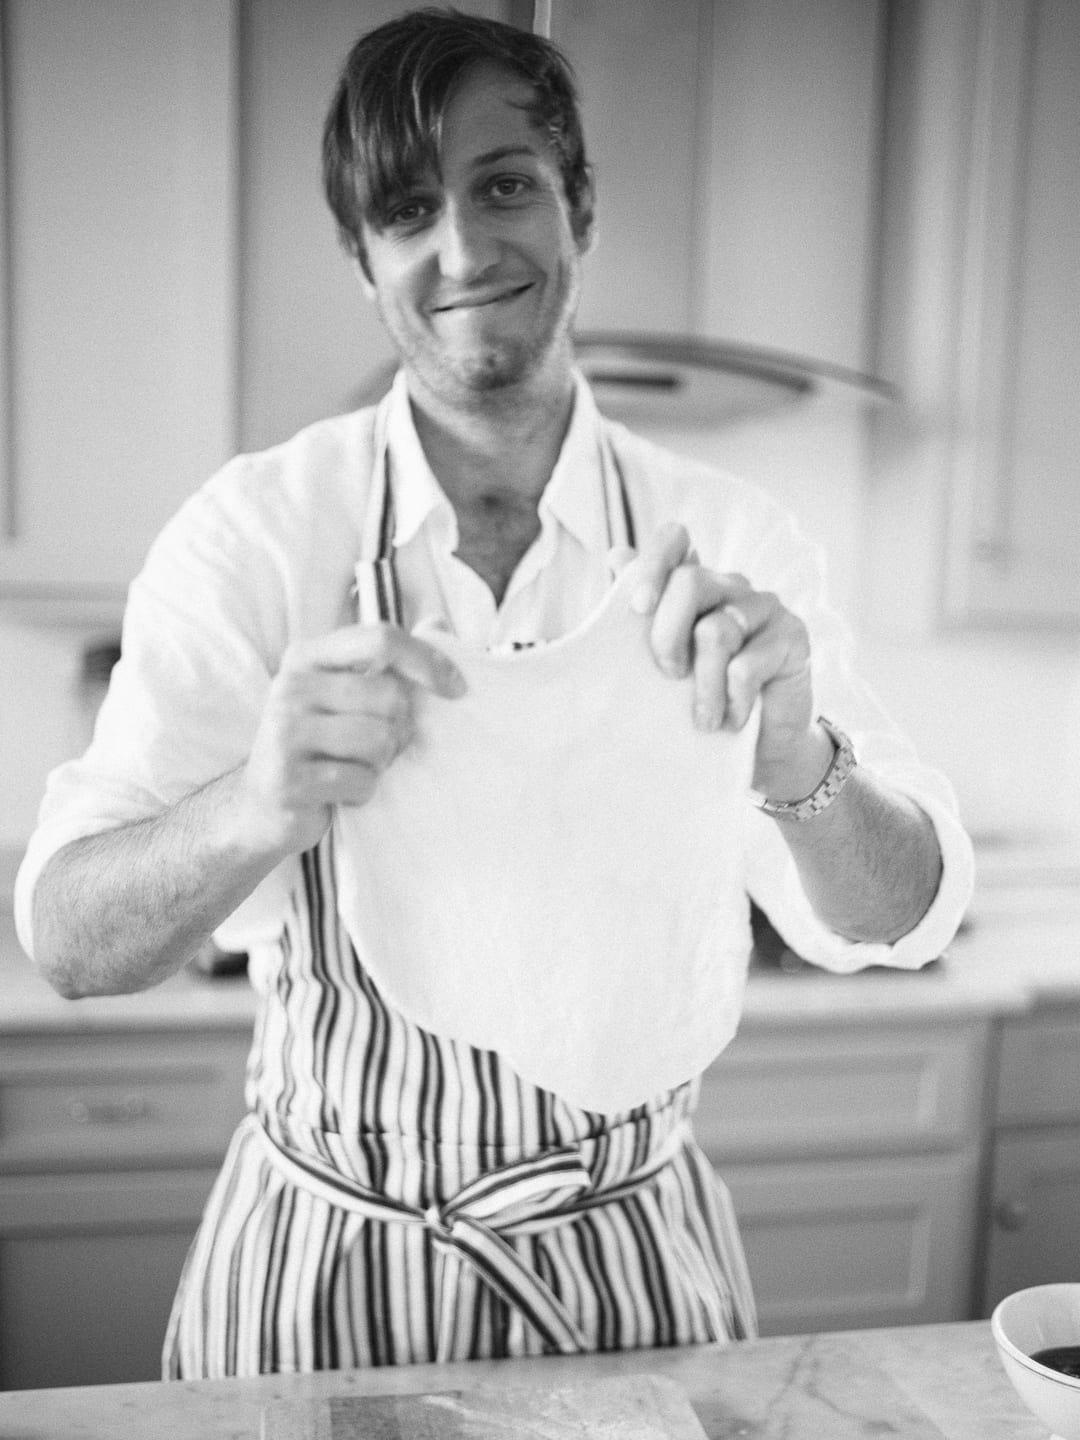 Pizza party man with pizza dough